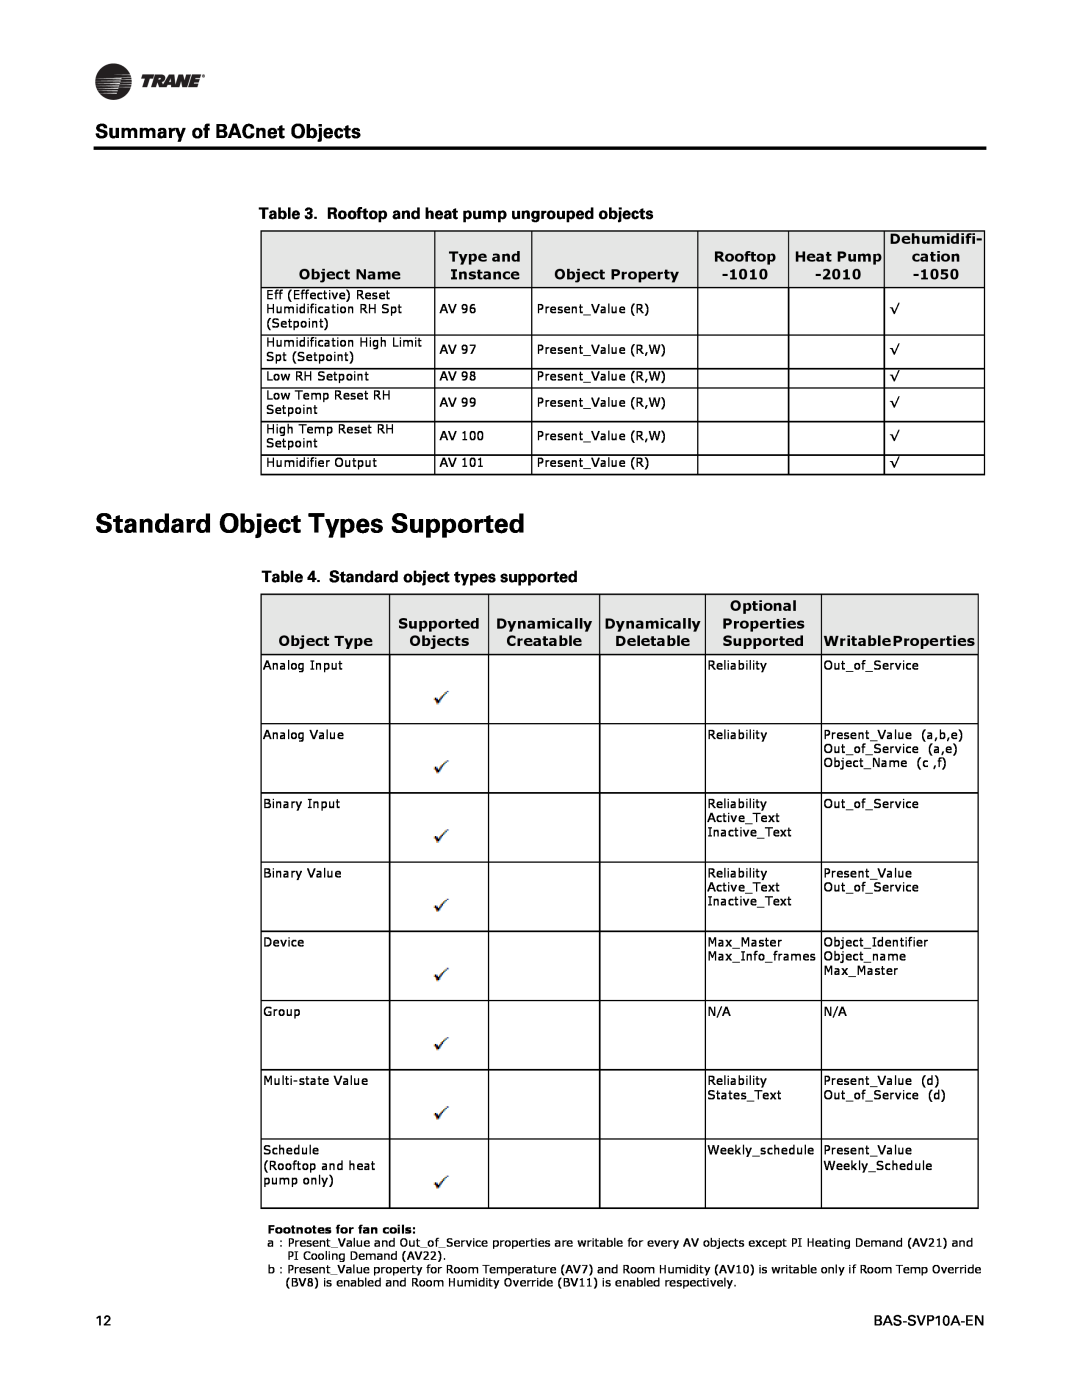 Trane BAS-SVP10A-EN Standard Object Types Supported, Summary of BACnet Objects, Rooftop and heat pump ungrouped objects 